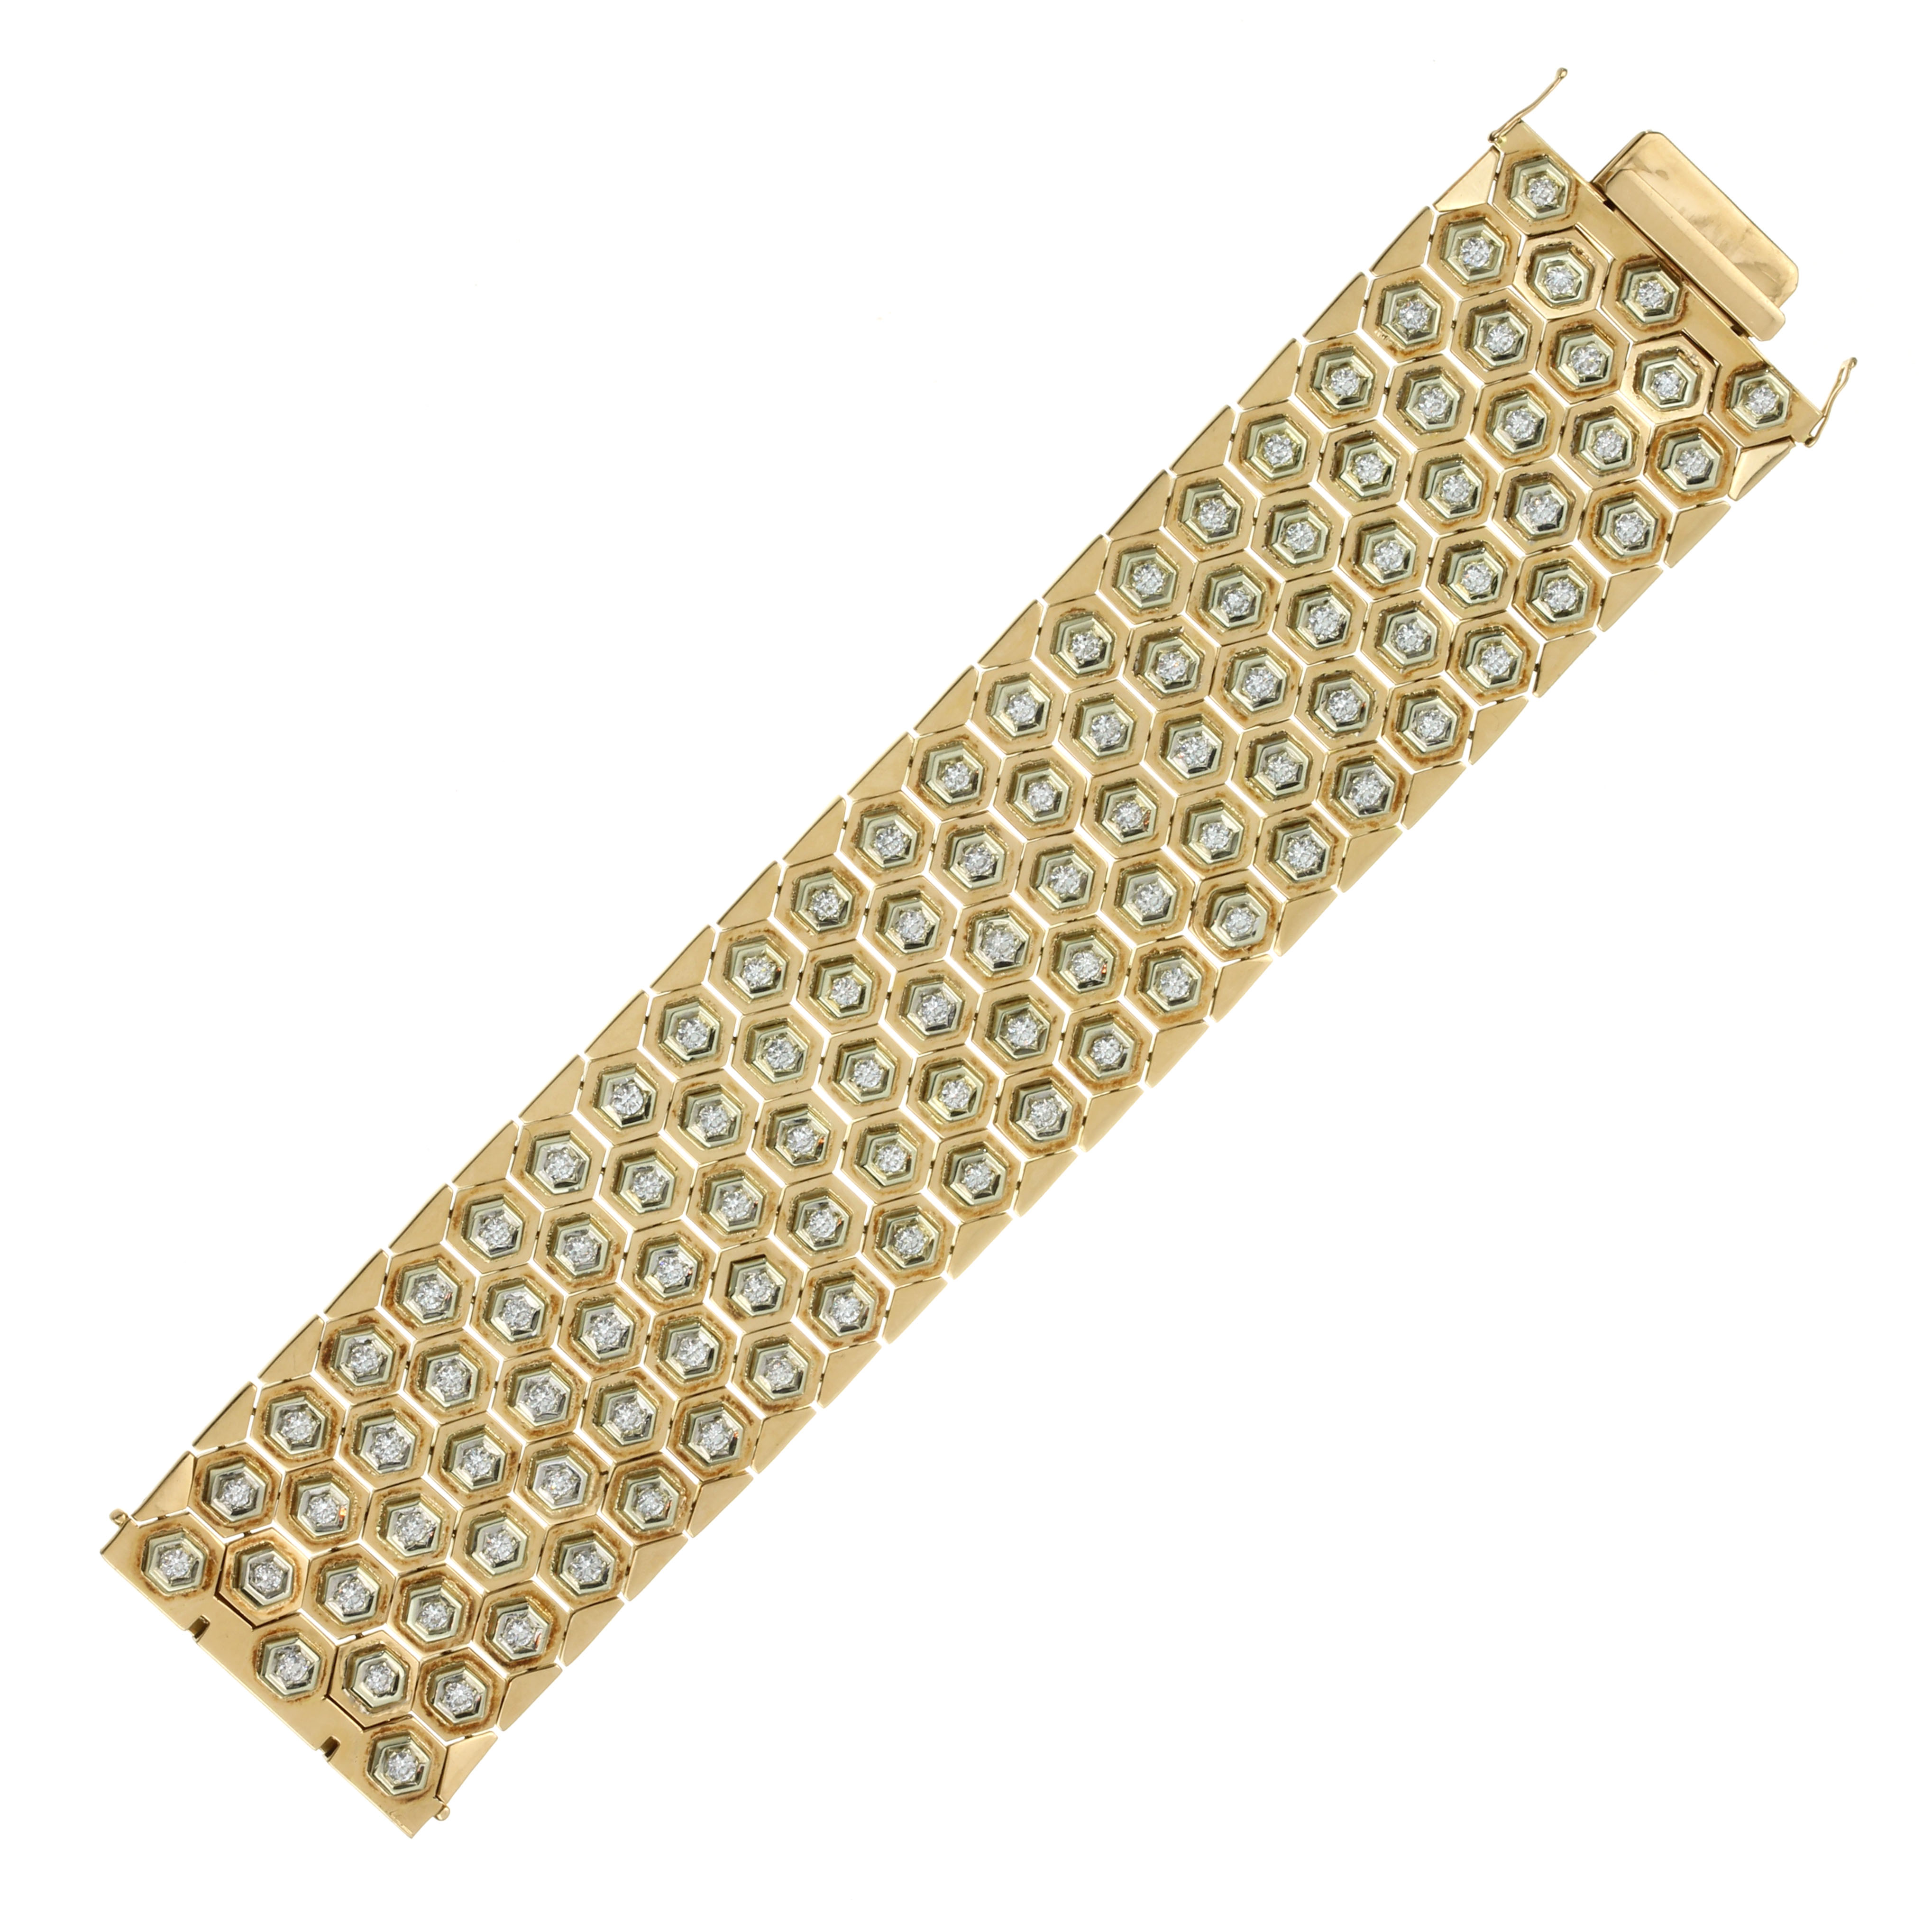 A DIAMOND FANCY LINK BRACELET in 18ct yellow gold, probably Italian, comprising five rows of